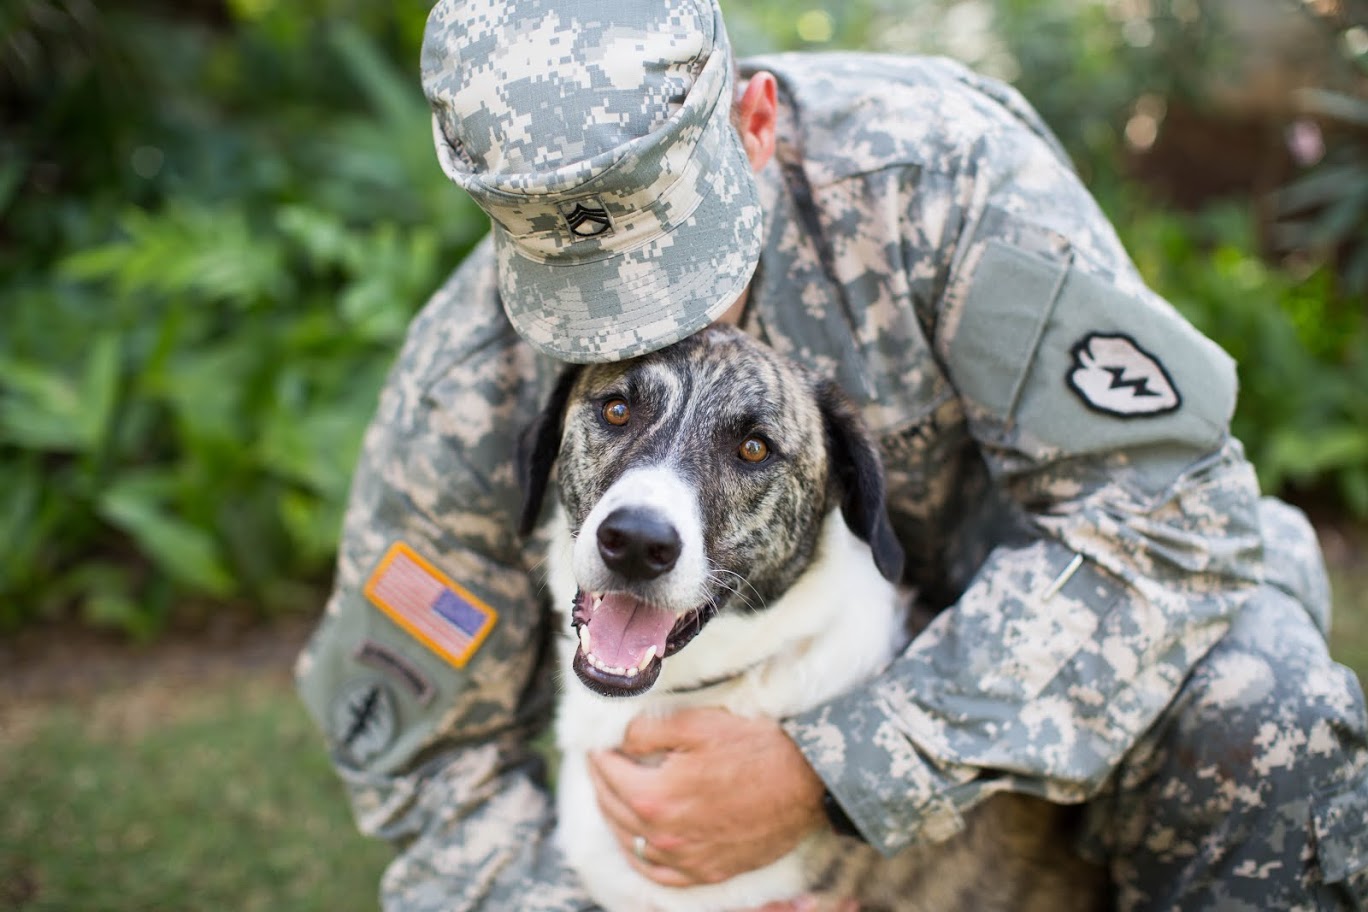 6 ways to support homeless veterans